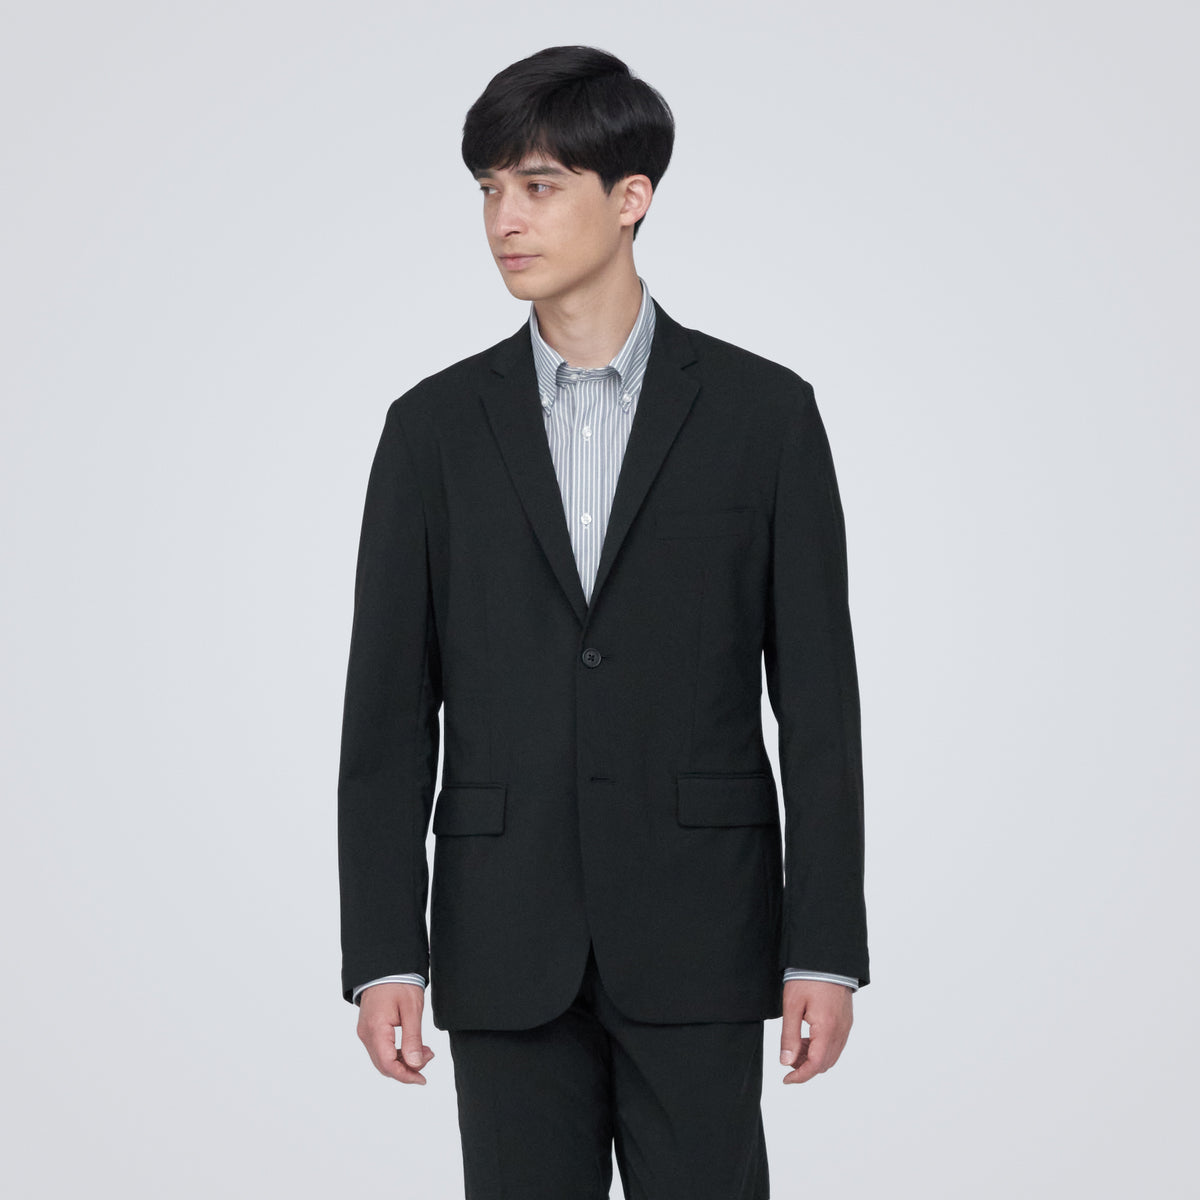 Men's Easy-care, Stretch Jacket | Business Outfit | MUJI USA